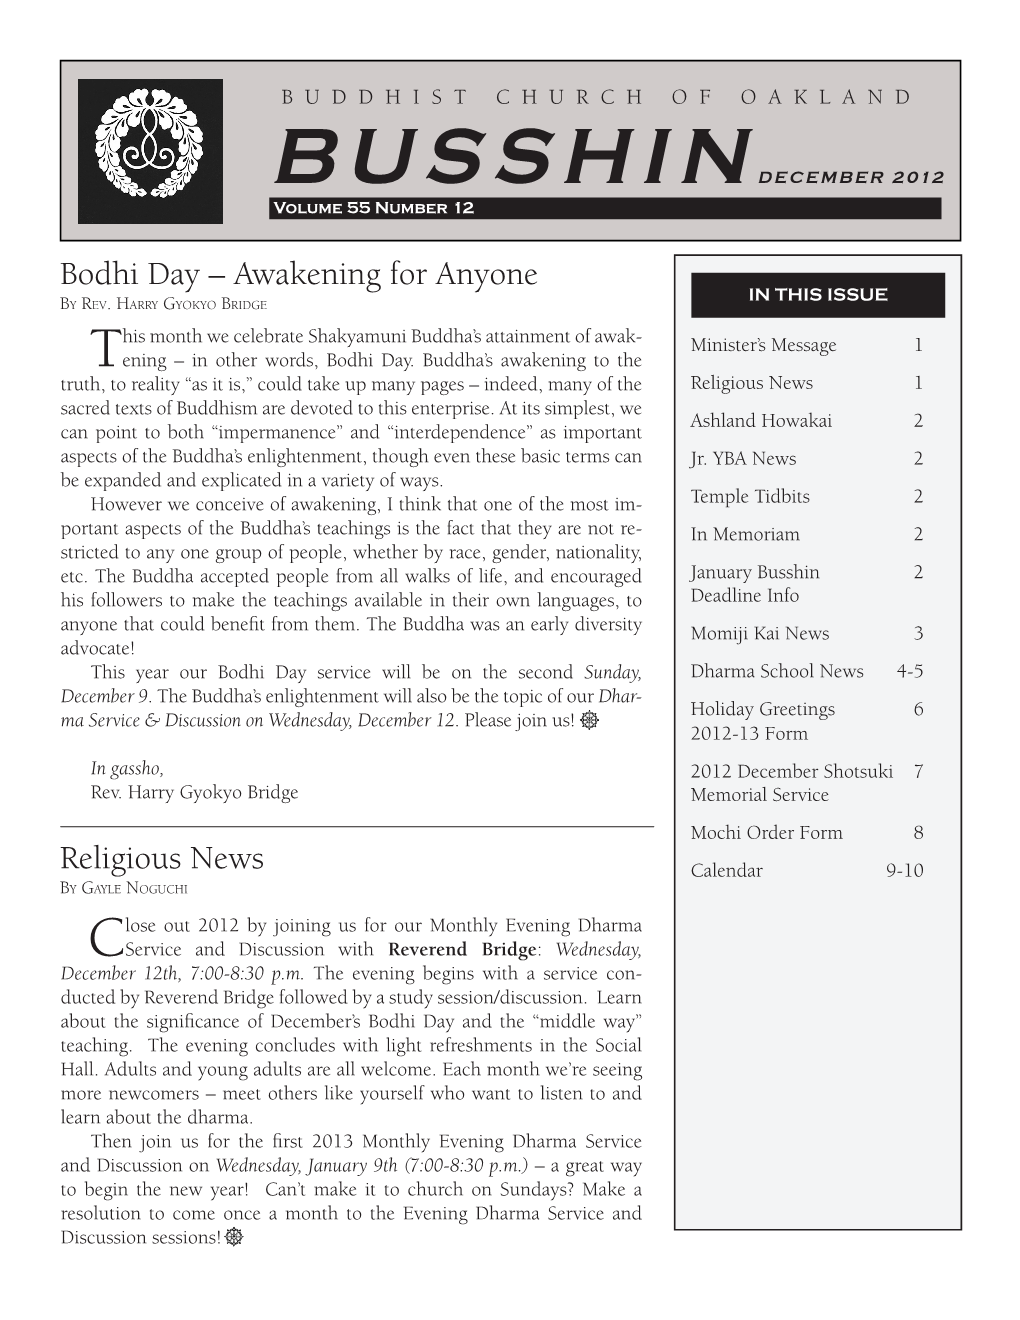 Bodhi Day – Awakening for Anyone in THIS ISSUE by Rev